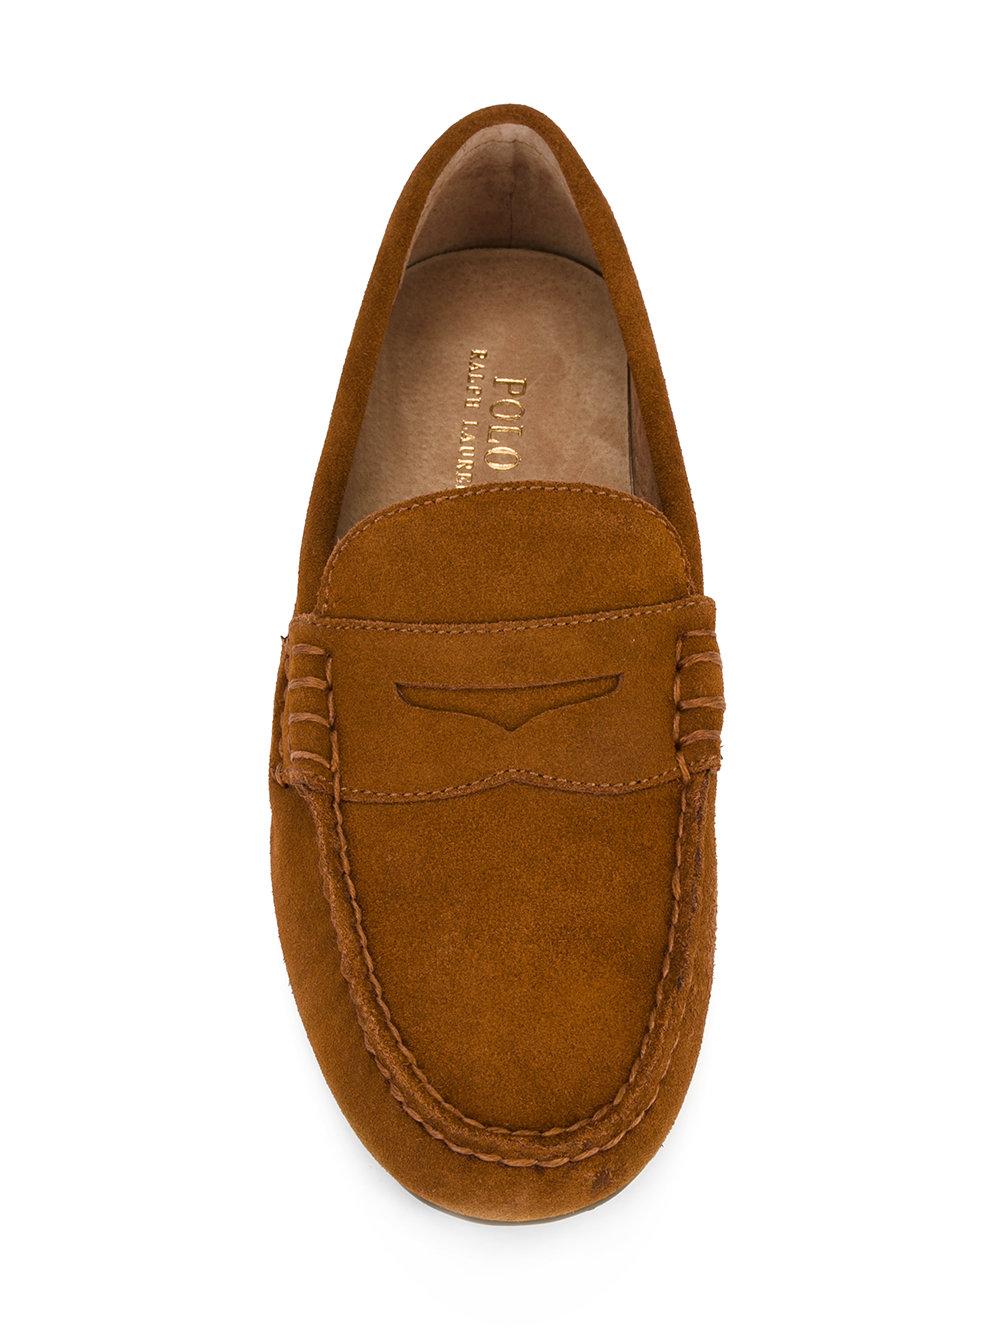 Lyst - Polo Ralph Lauren Classic Penny Loafers in Brown for Men